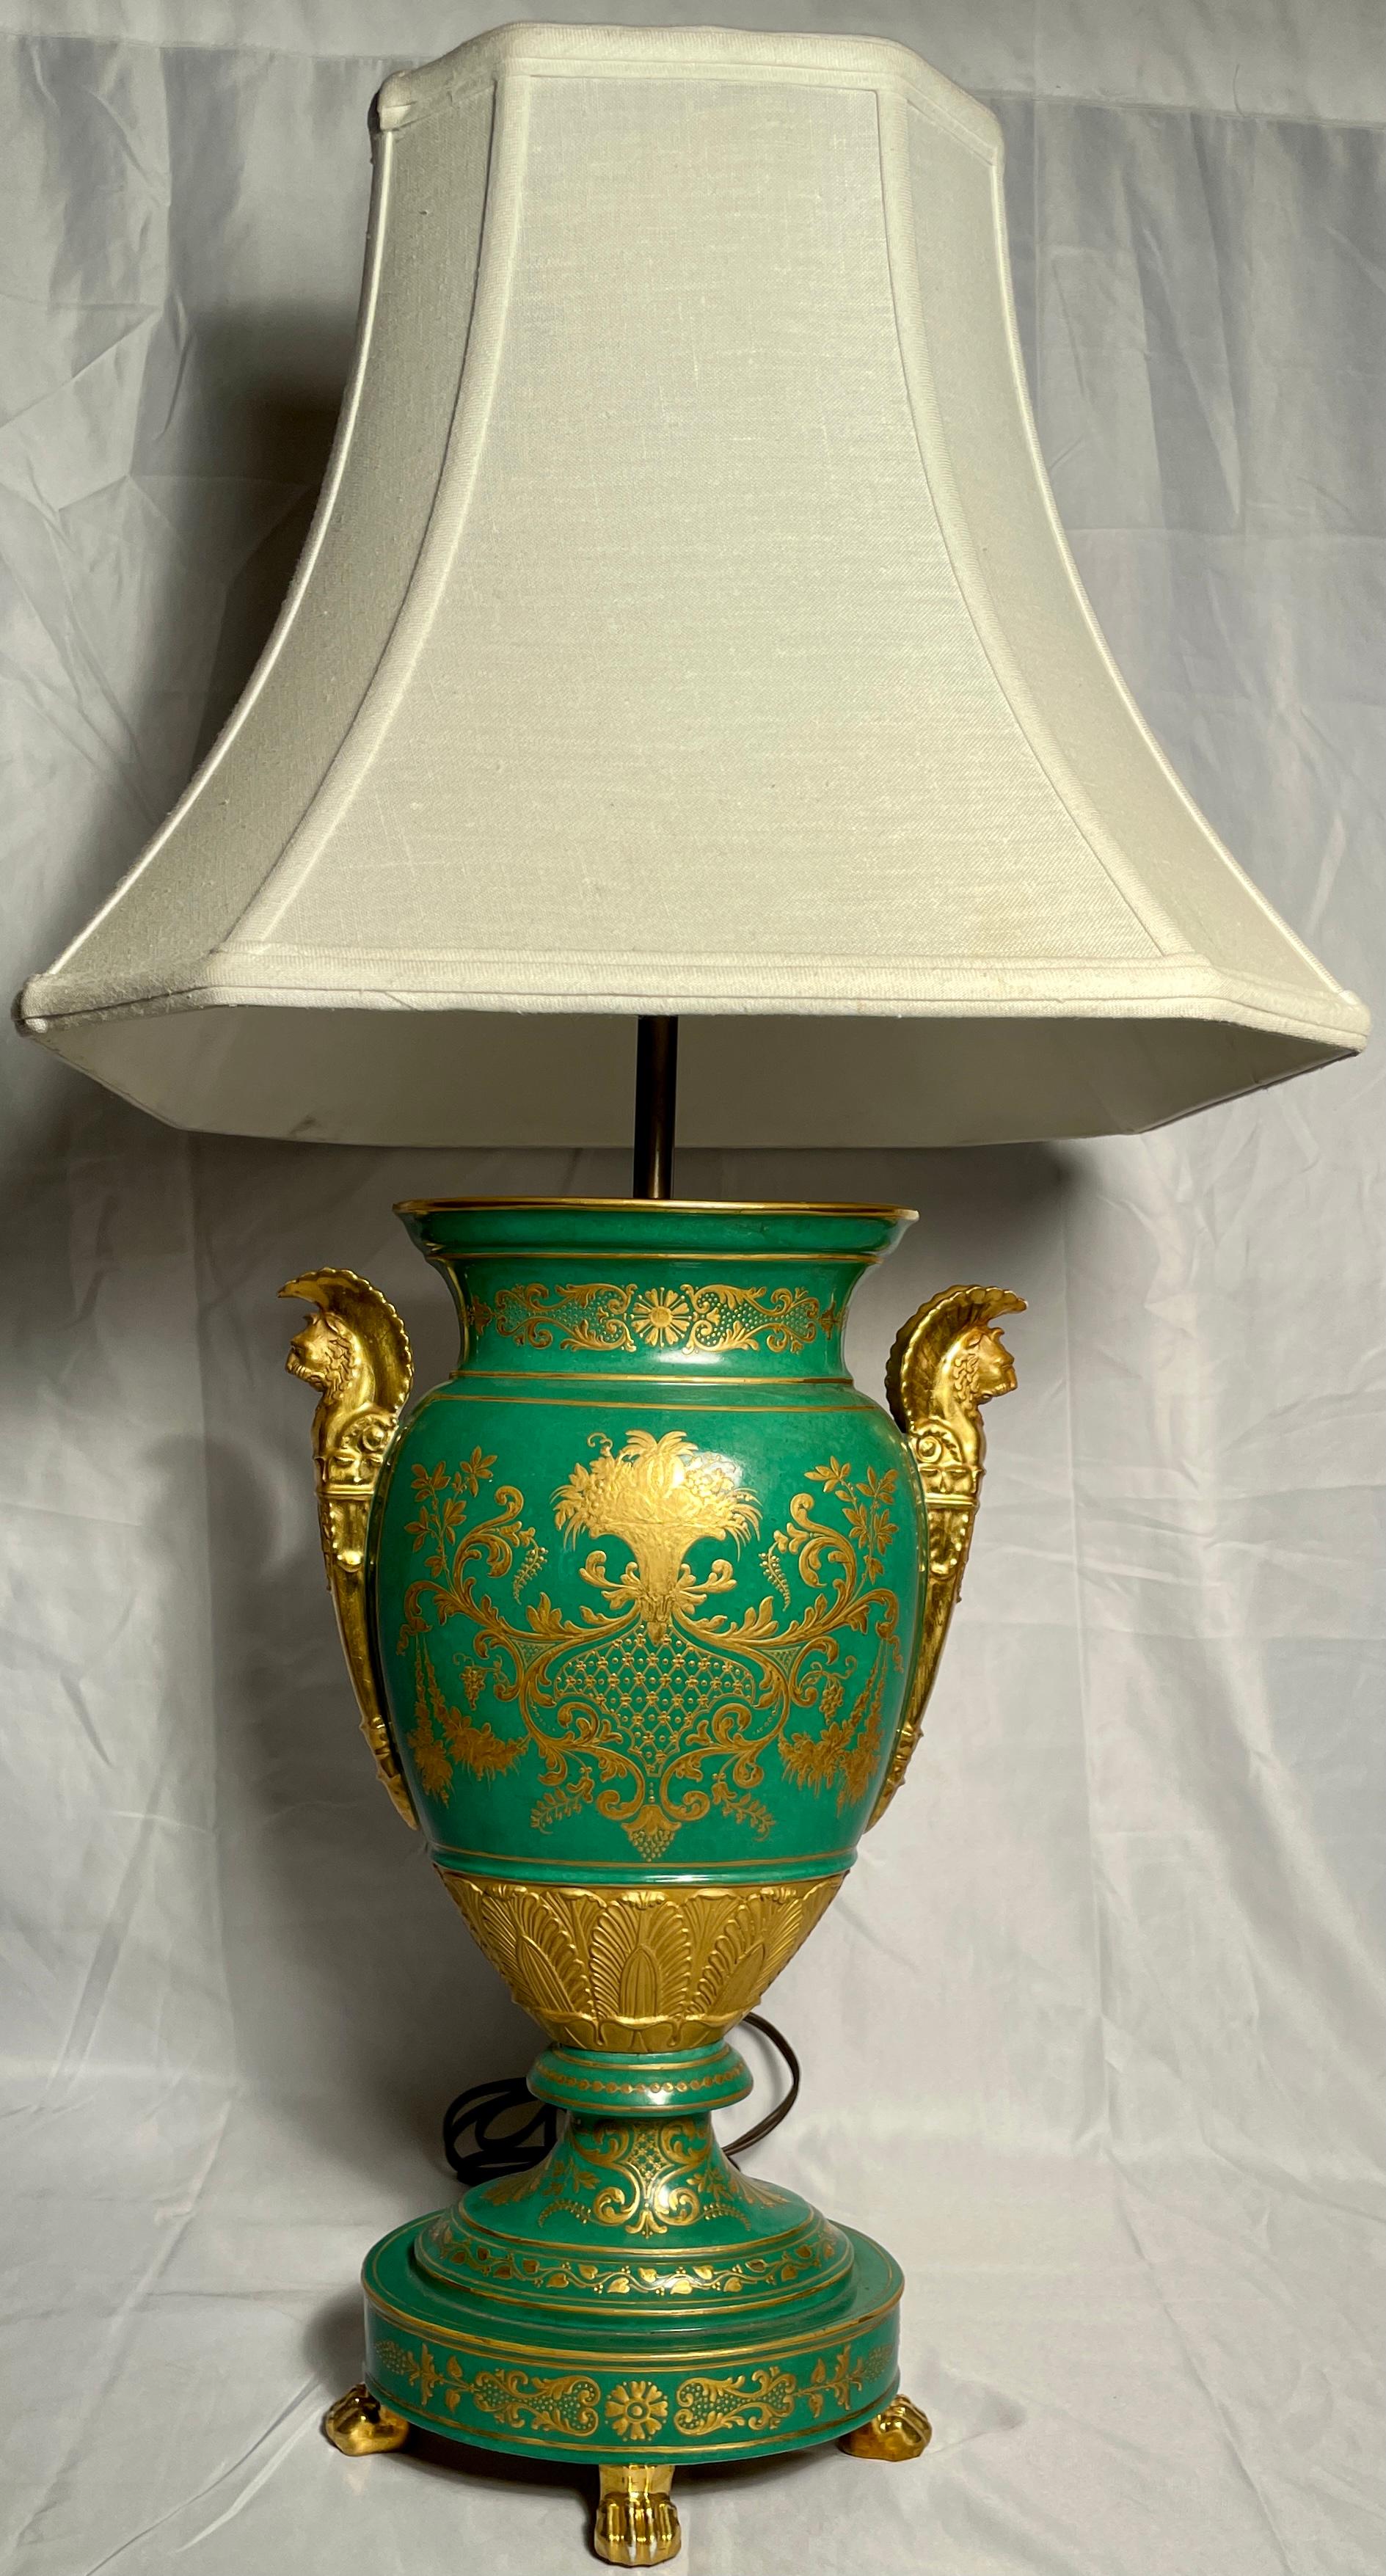 Antique 19th Century French Green and Gold Painted Porcelain Lamp, Circa 1860 For Sale 6